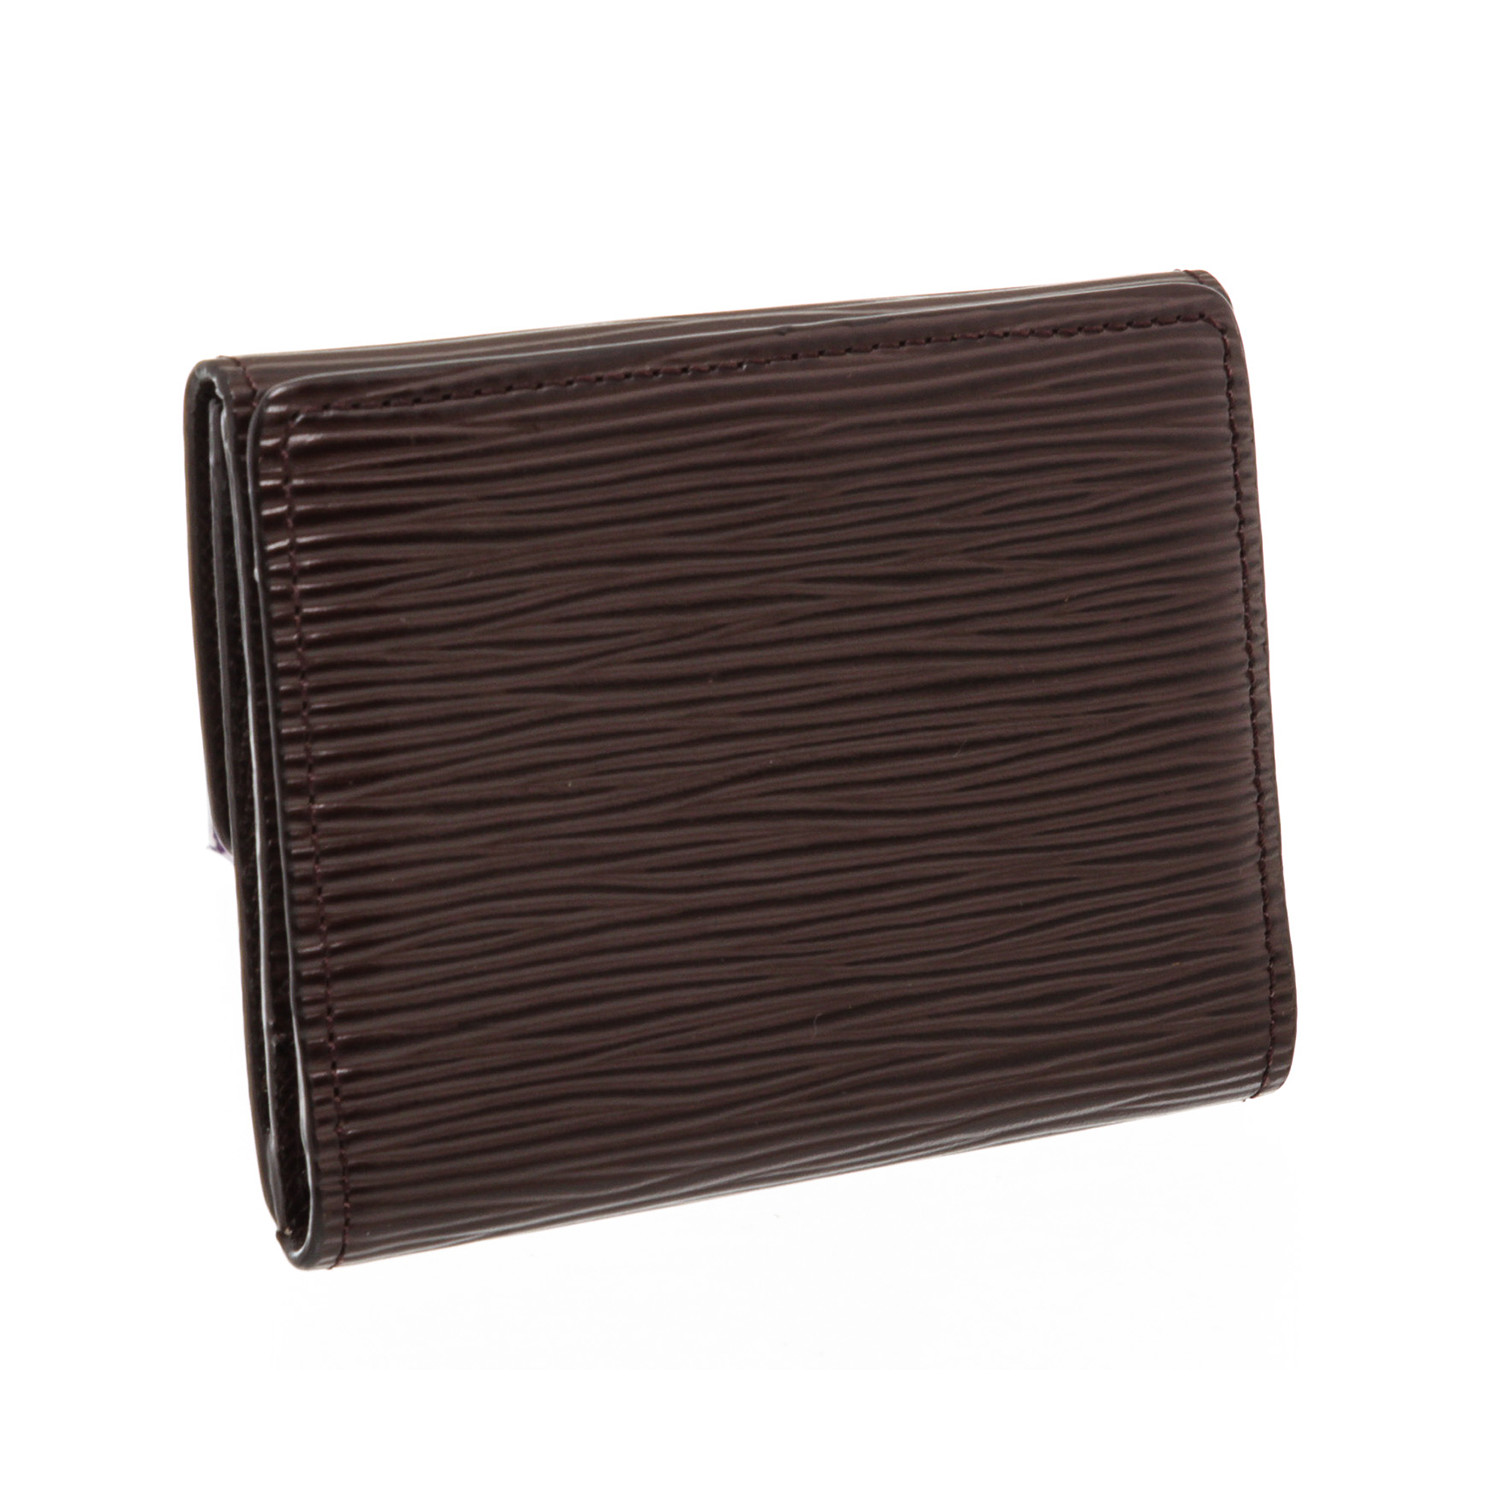 Louis Vuitton // Epi Leather Small Cardholder Wallet // Brown // Pre-Owned - Pre-Owned Designer ...